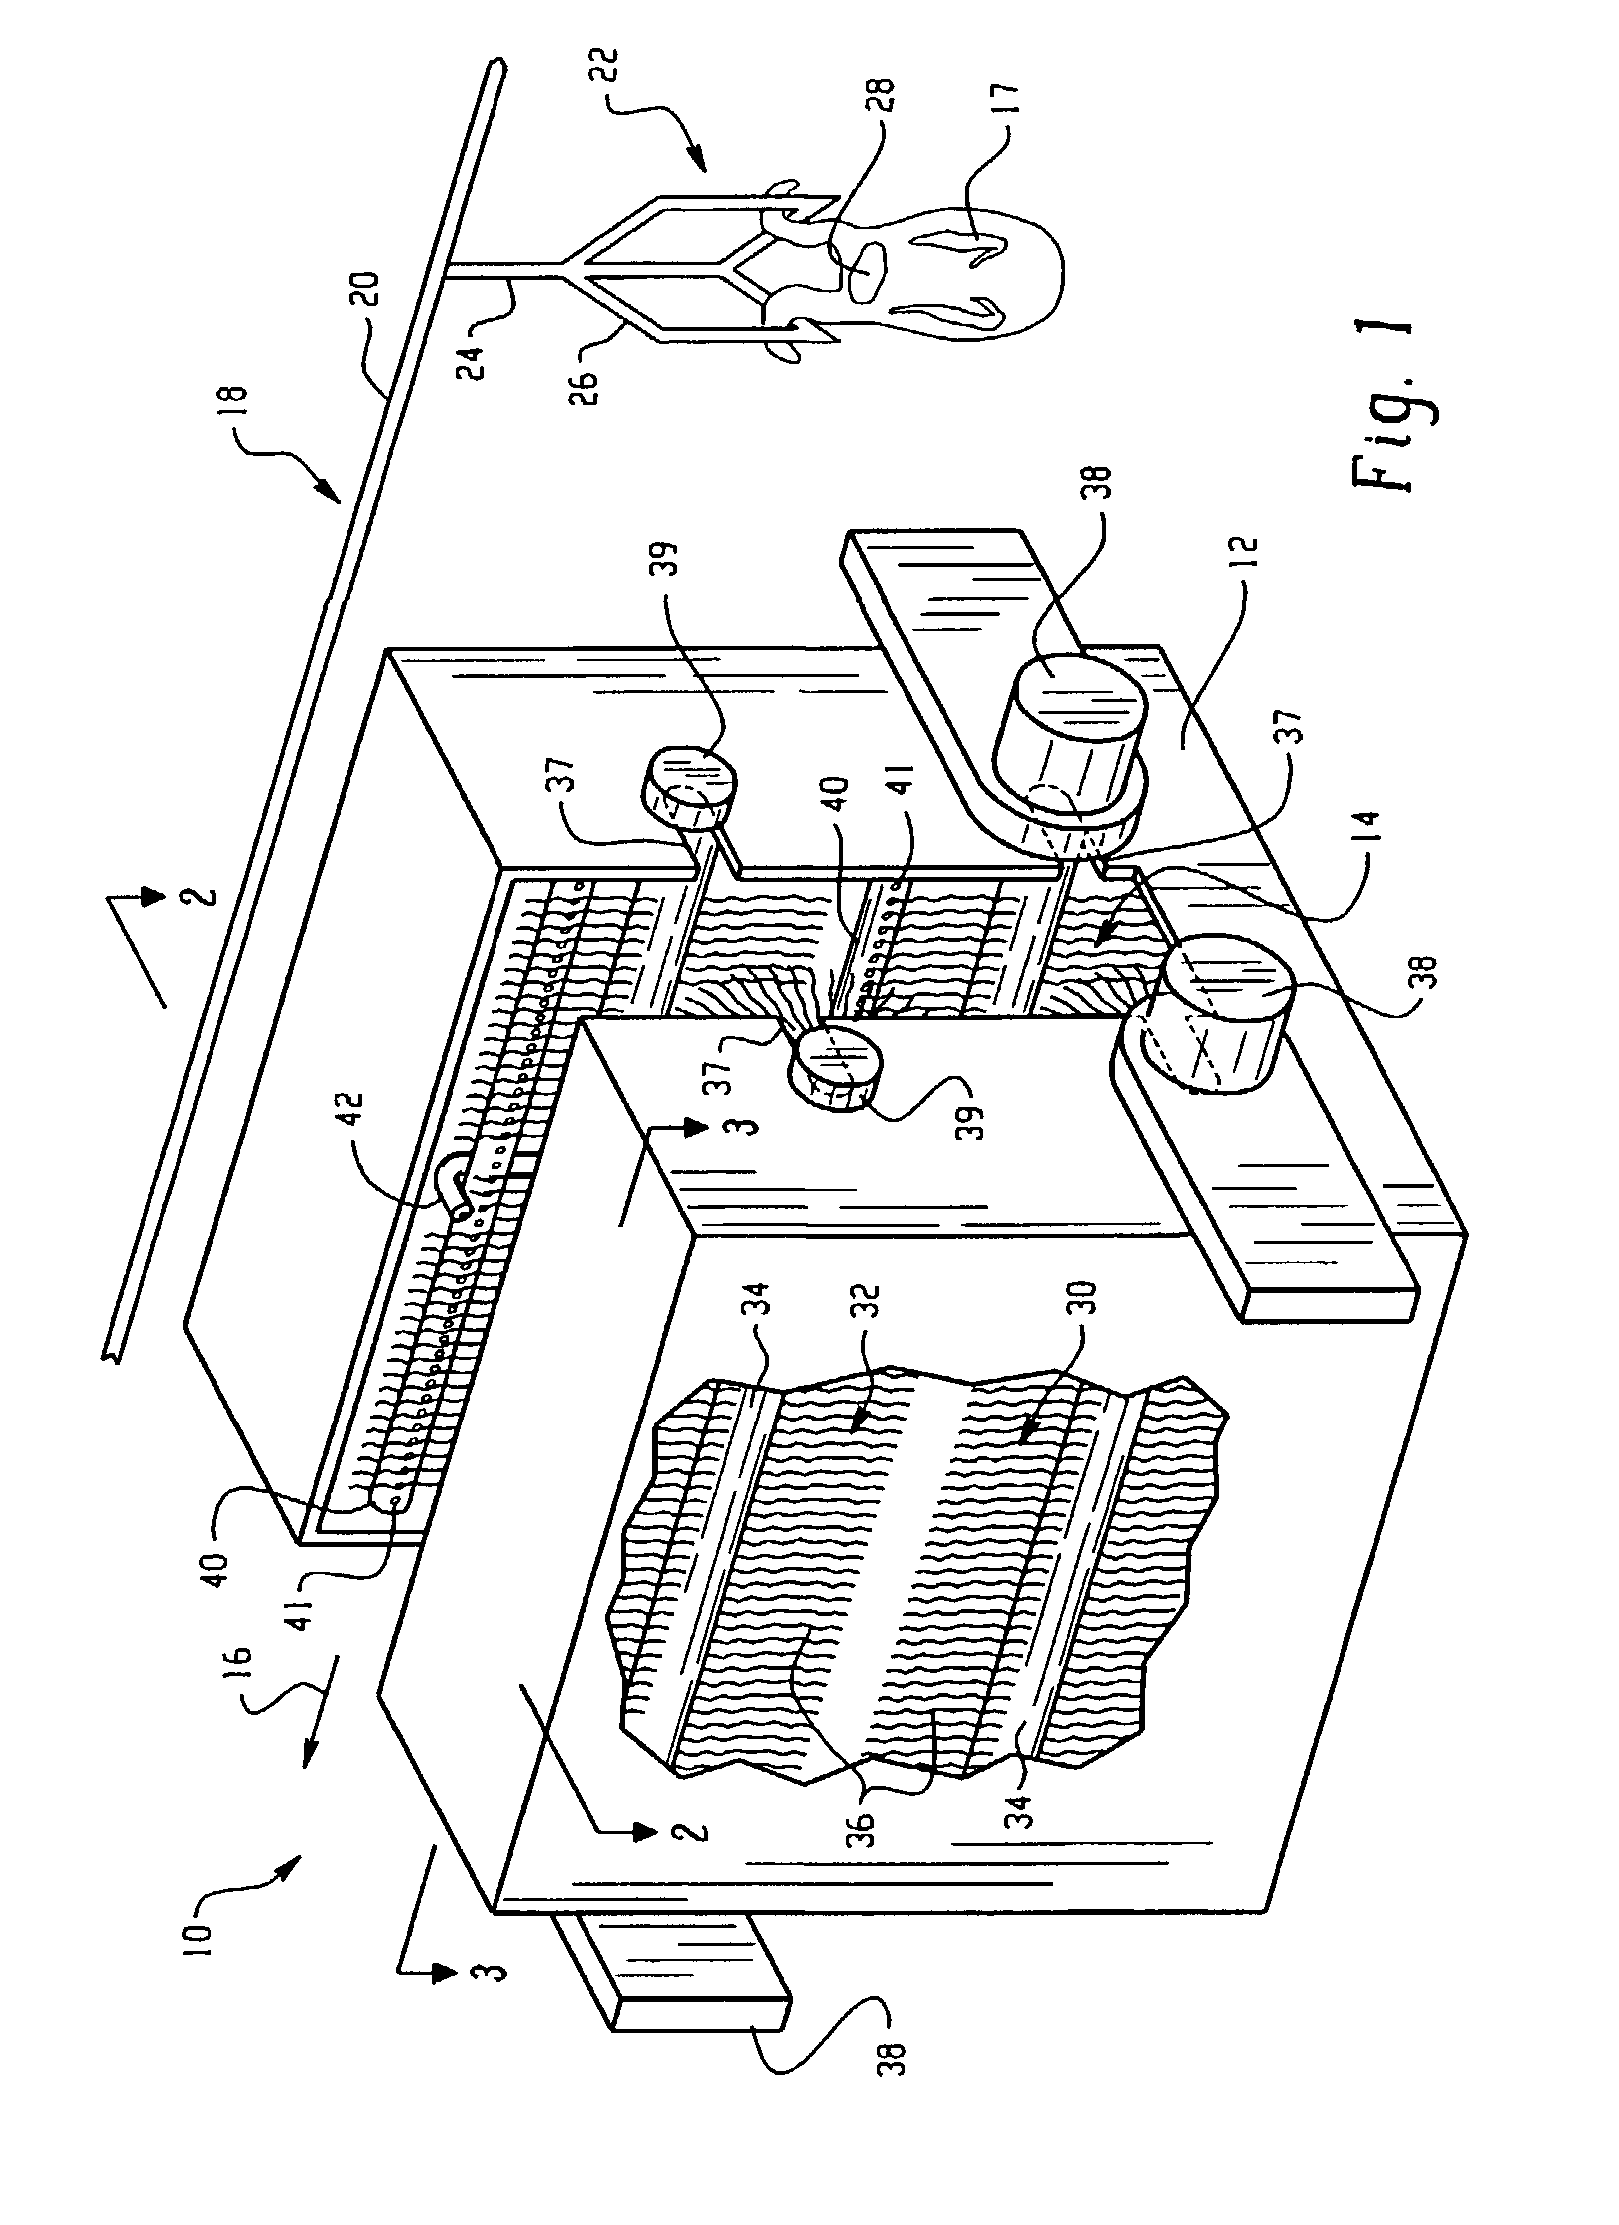 Post-evisceration process and apparatus